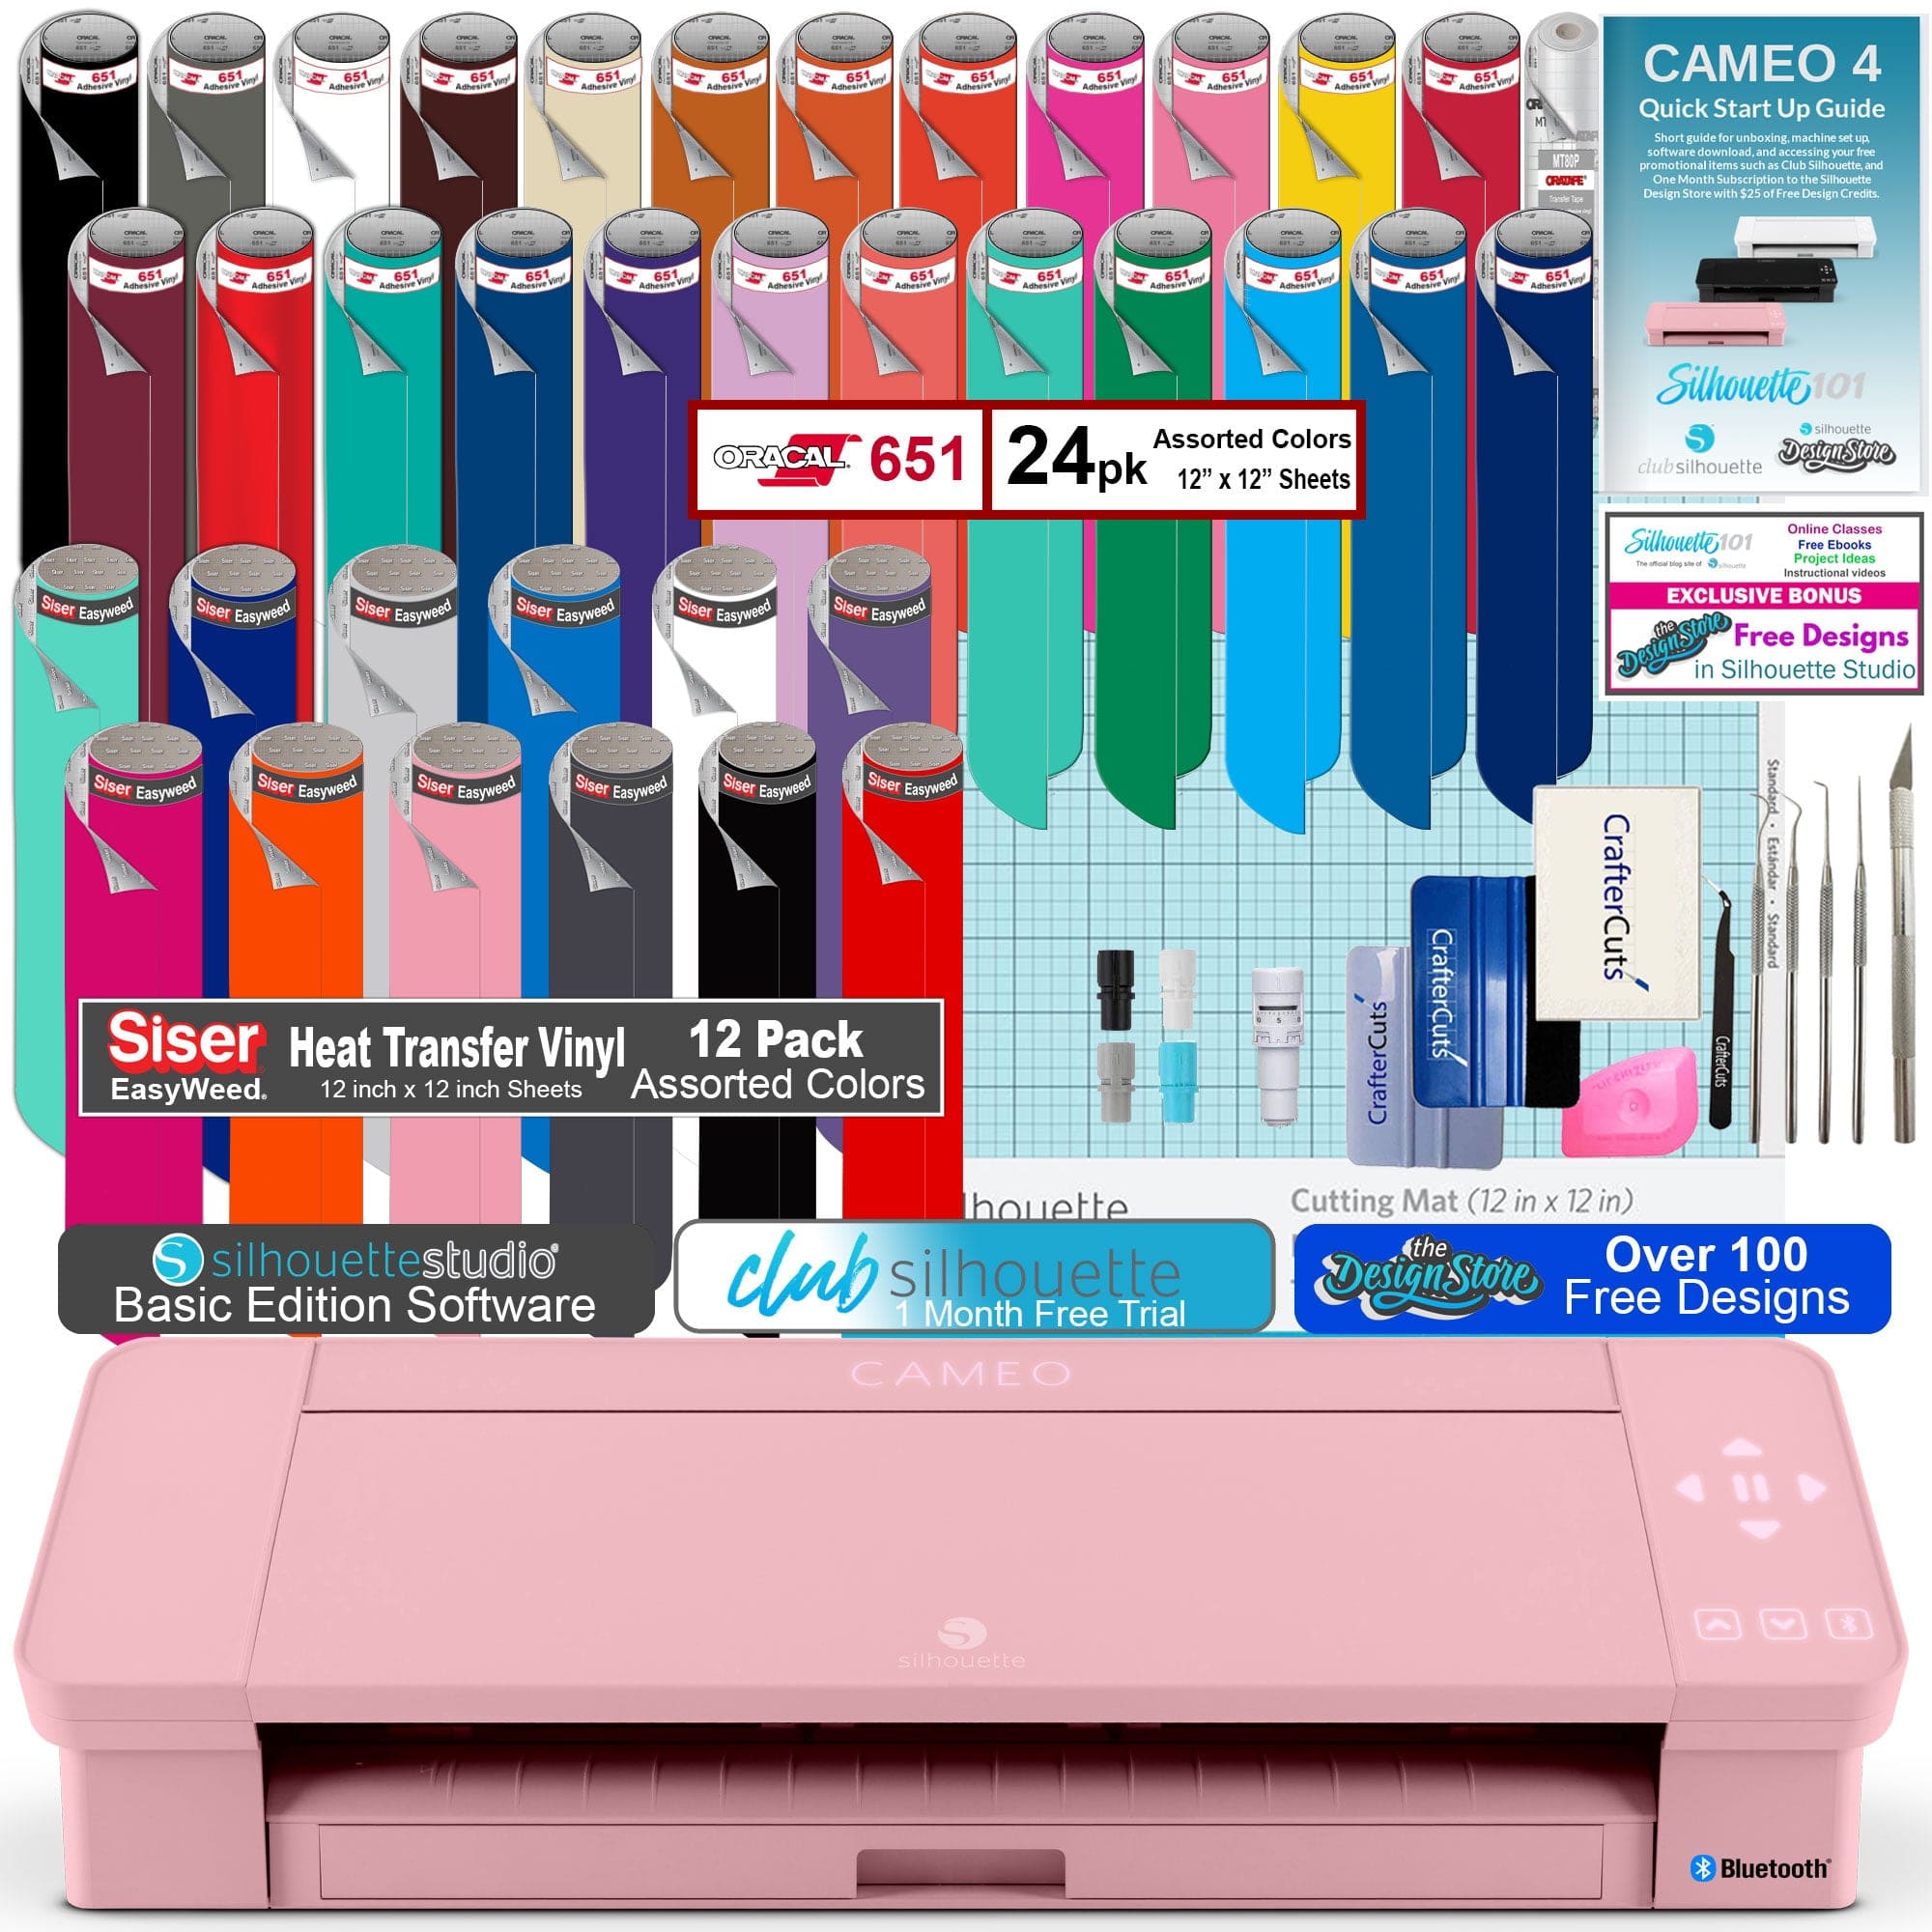 Silhouette America Silhouette Cameo 4 Pink Bundle with 24 Sheets of Oracal 651, 12 Sheets of Siser Easyweed, Oratape, Vinyl Tool Kit, Ebooks, Classes, and Bonus Designs